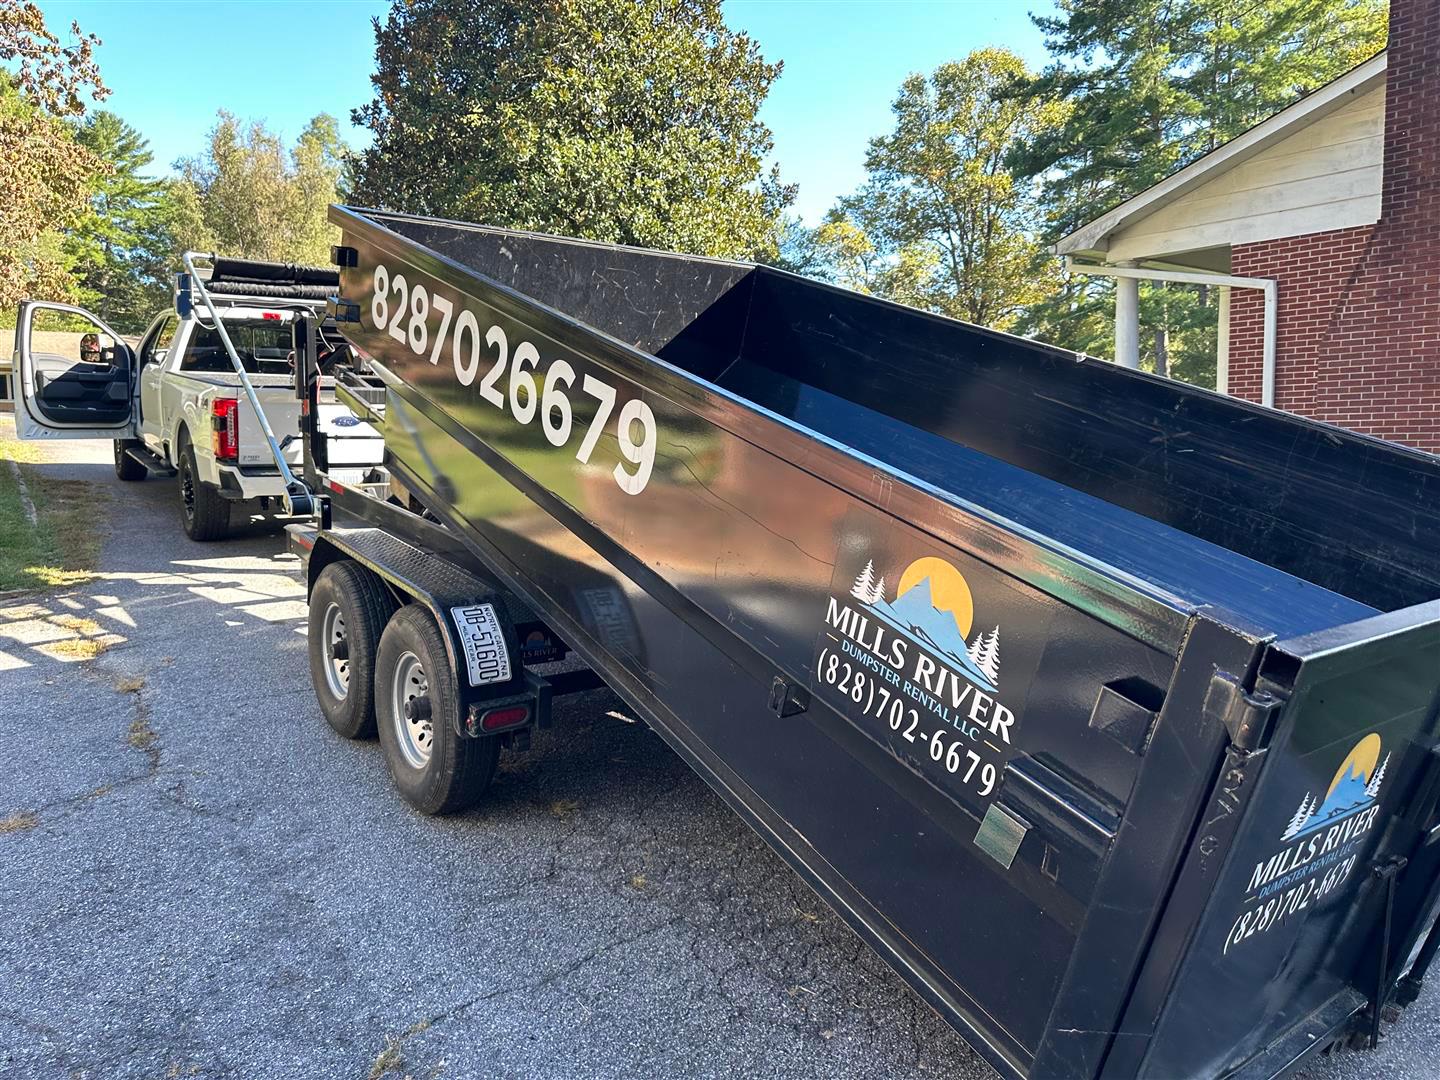 With Mills River Dumpster Rental, our reliable dumpster rental delivery service ensures that your chosen dumpster is promptly and safely delivered to your location. Whether it's a residential, commercial, or construction site, our team ensures a smooth and hassle-free delivery process, allowing you to focus on your project while we take care of the logistics.